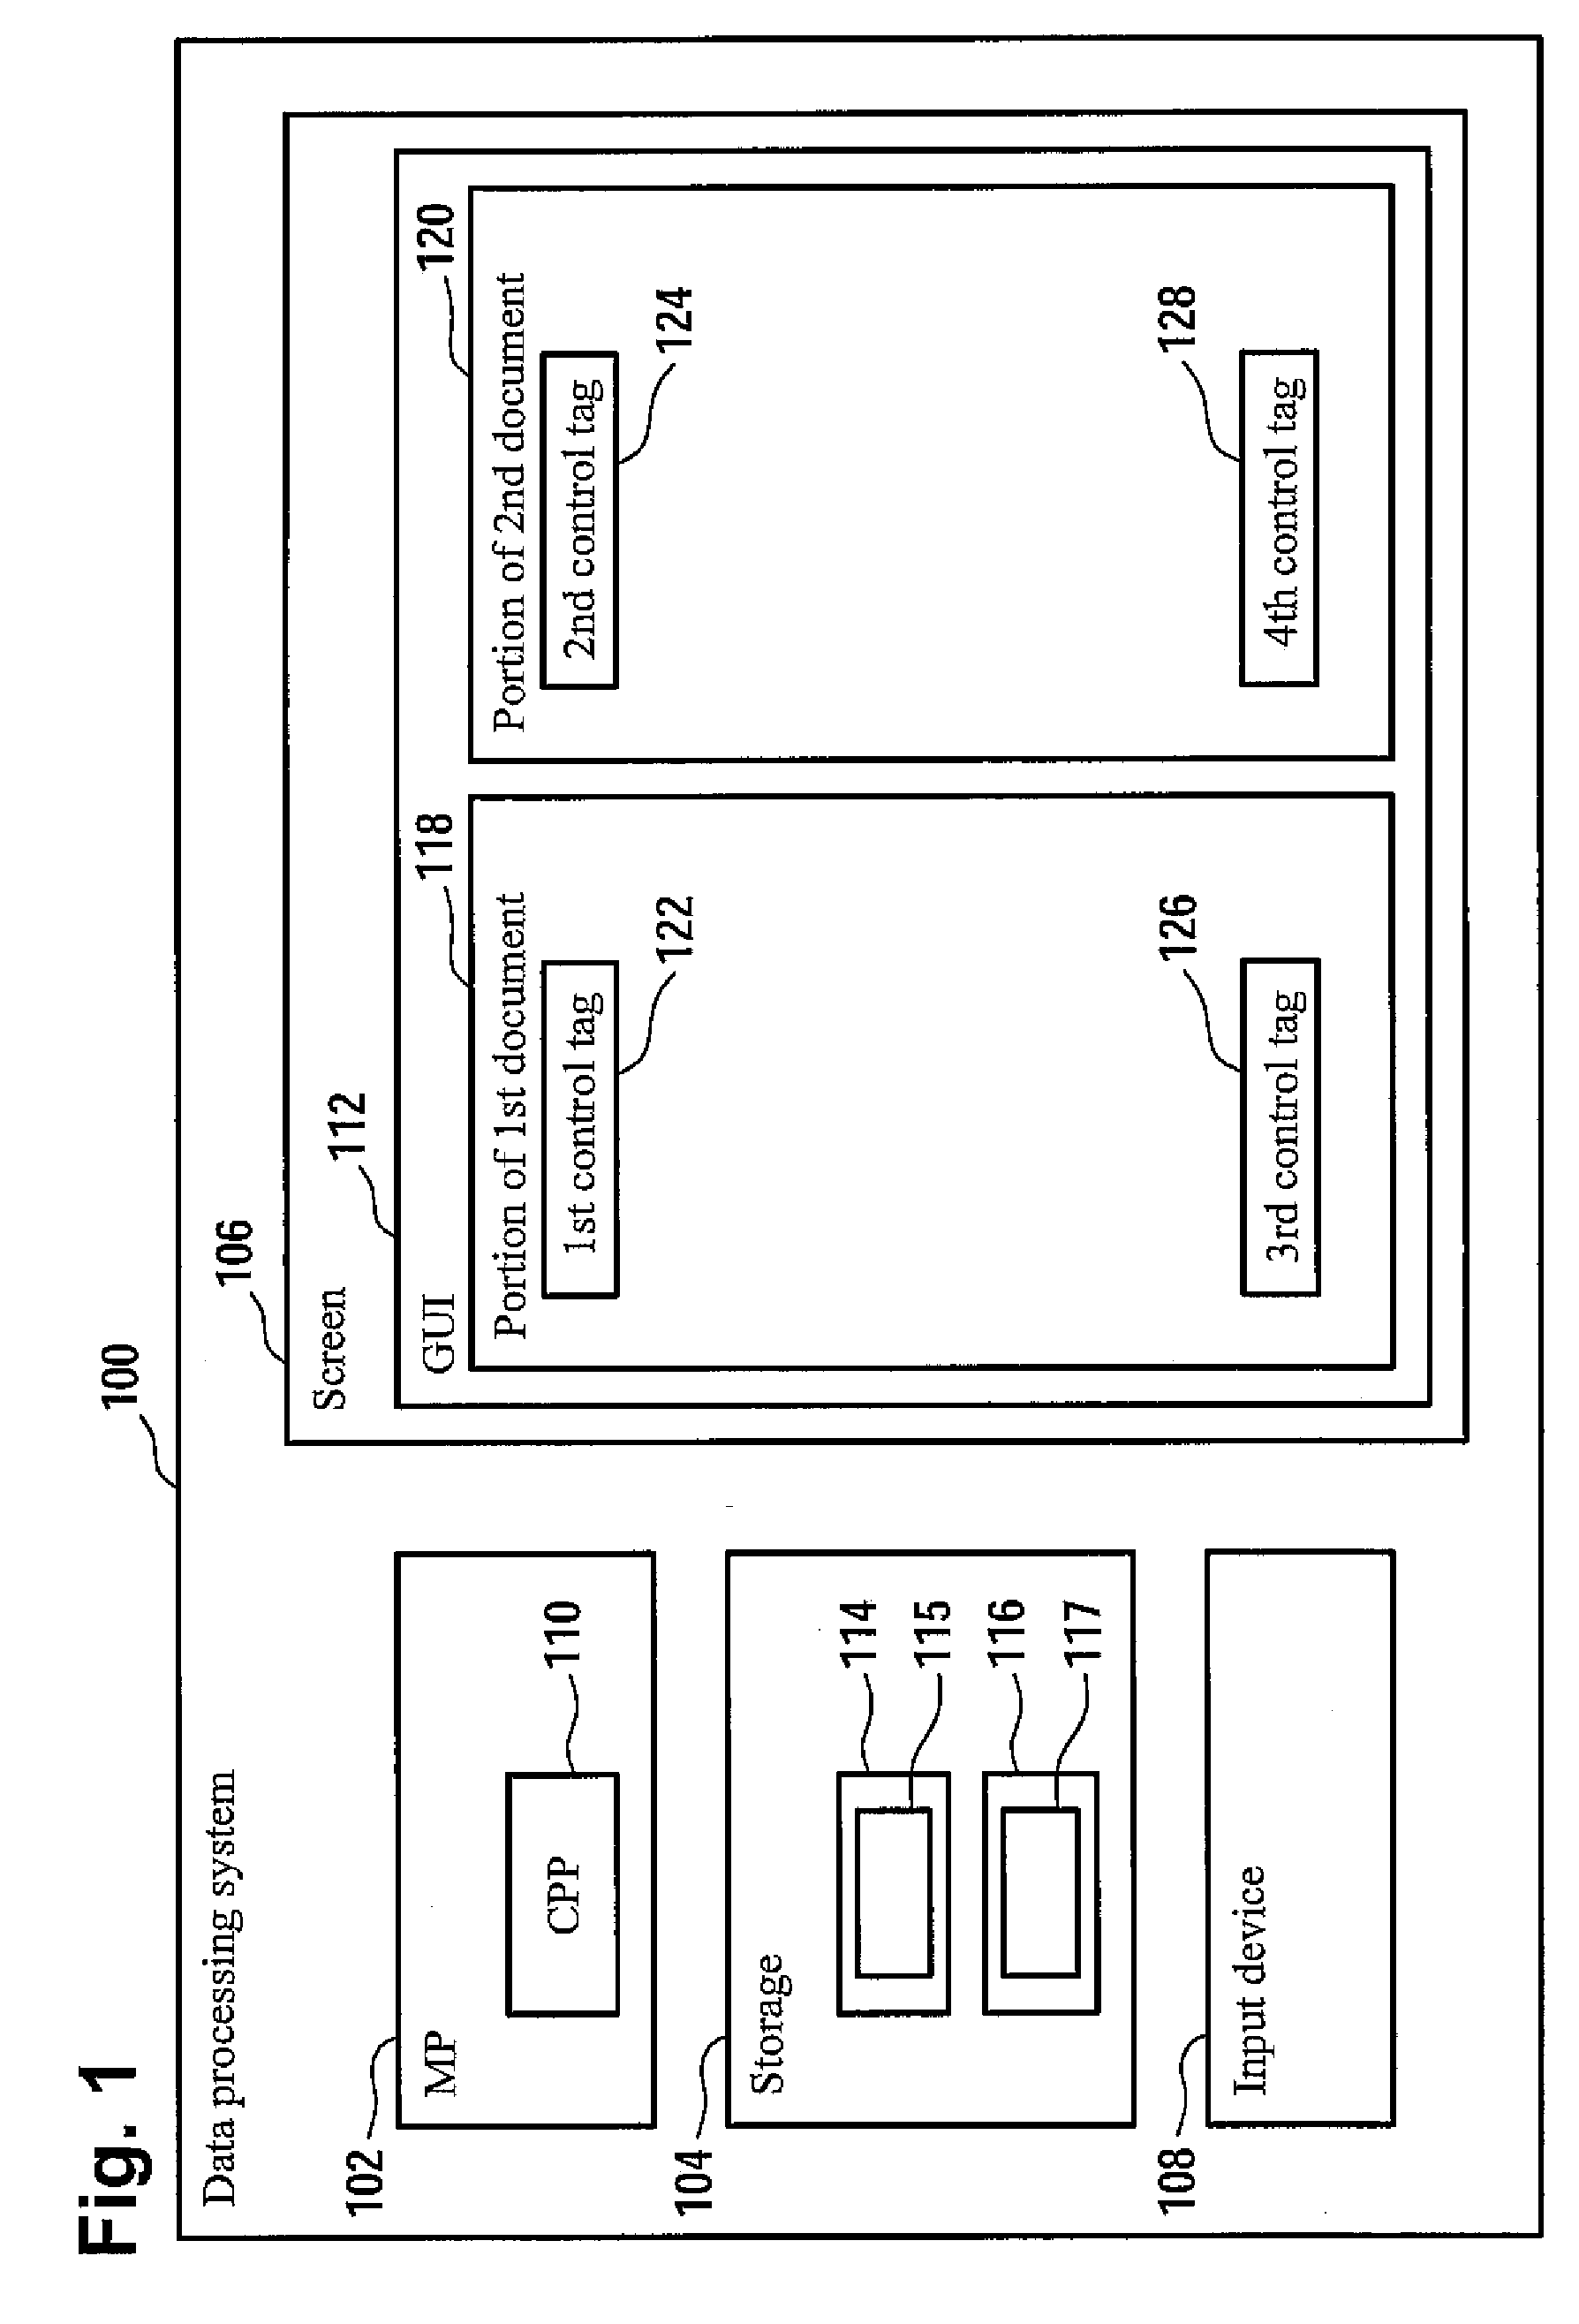 Method and data processing system for displaying synchronously documents to a user